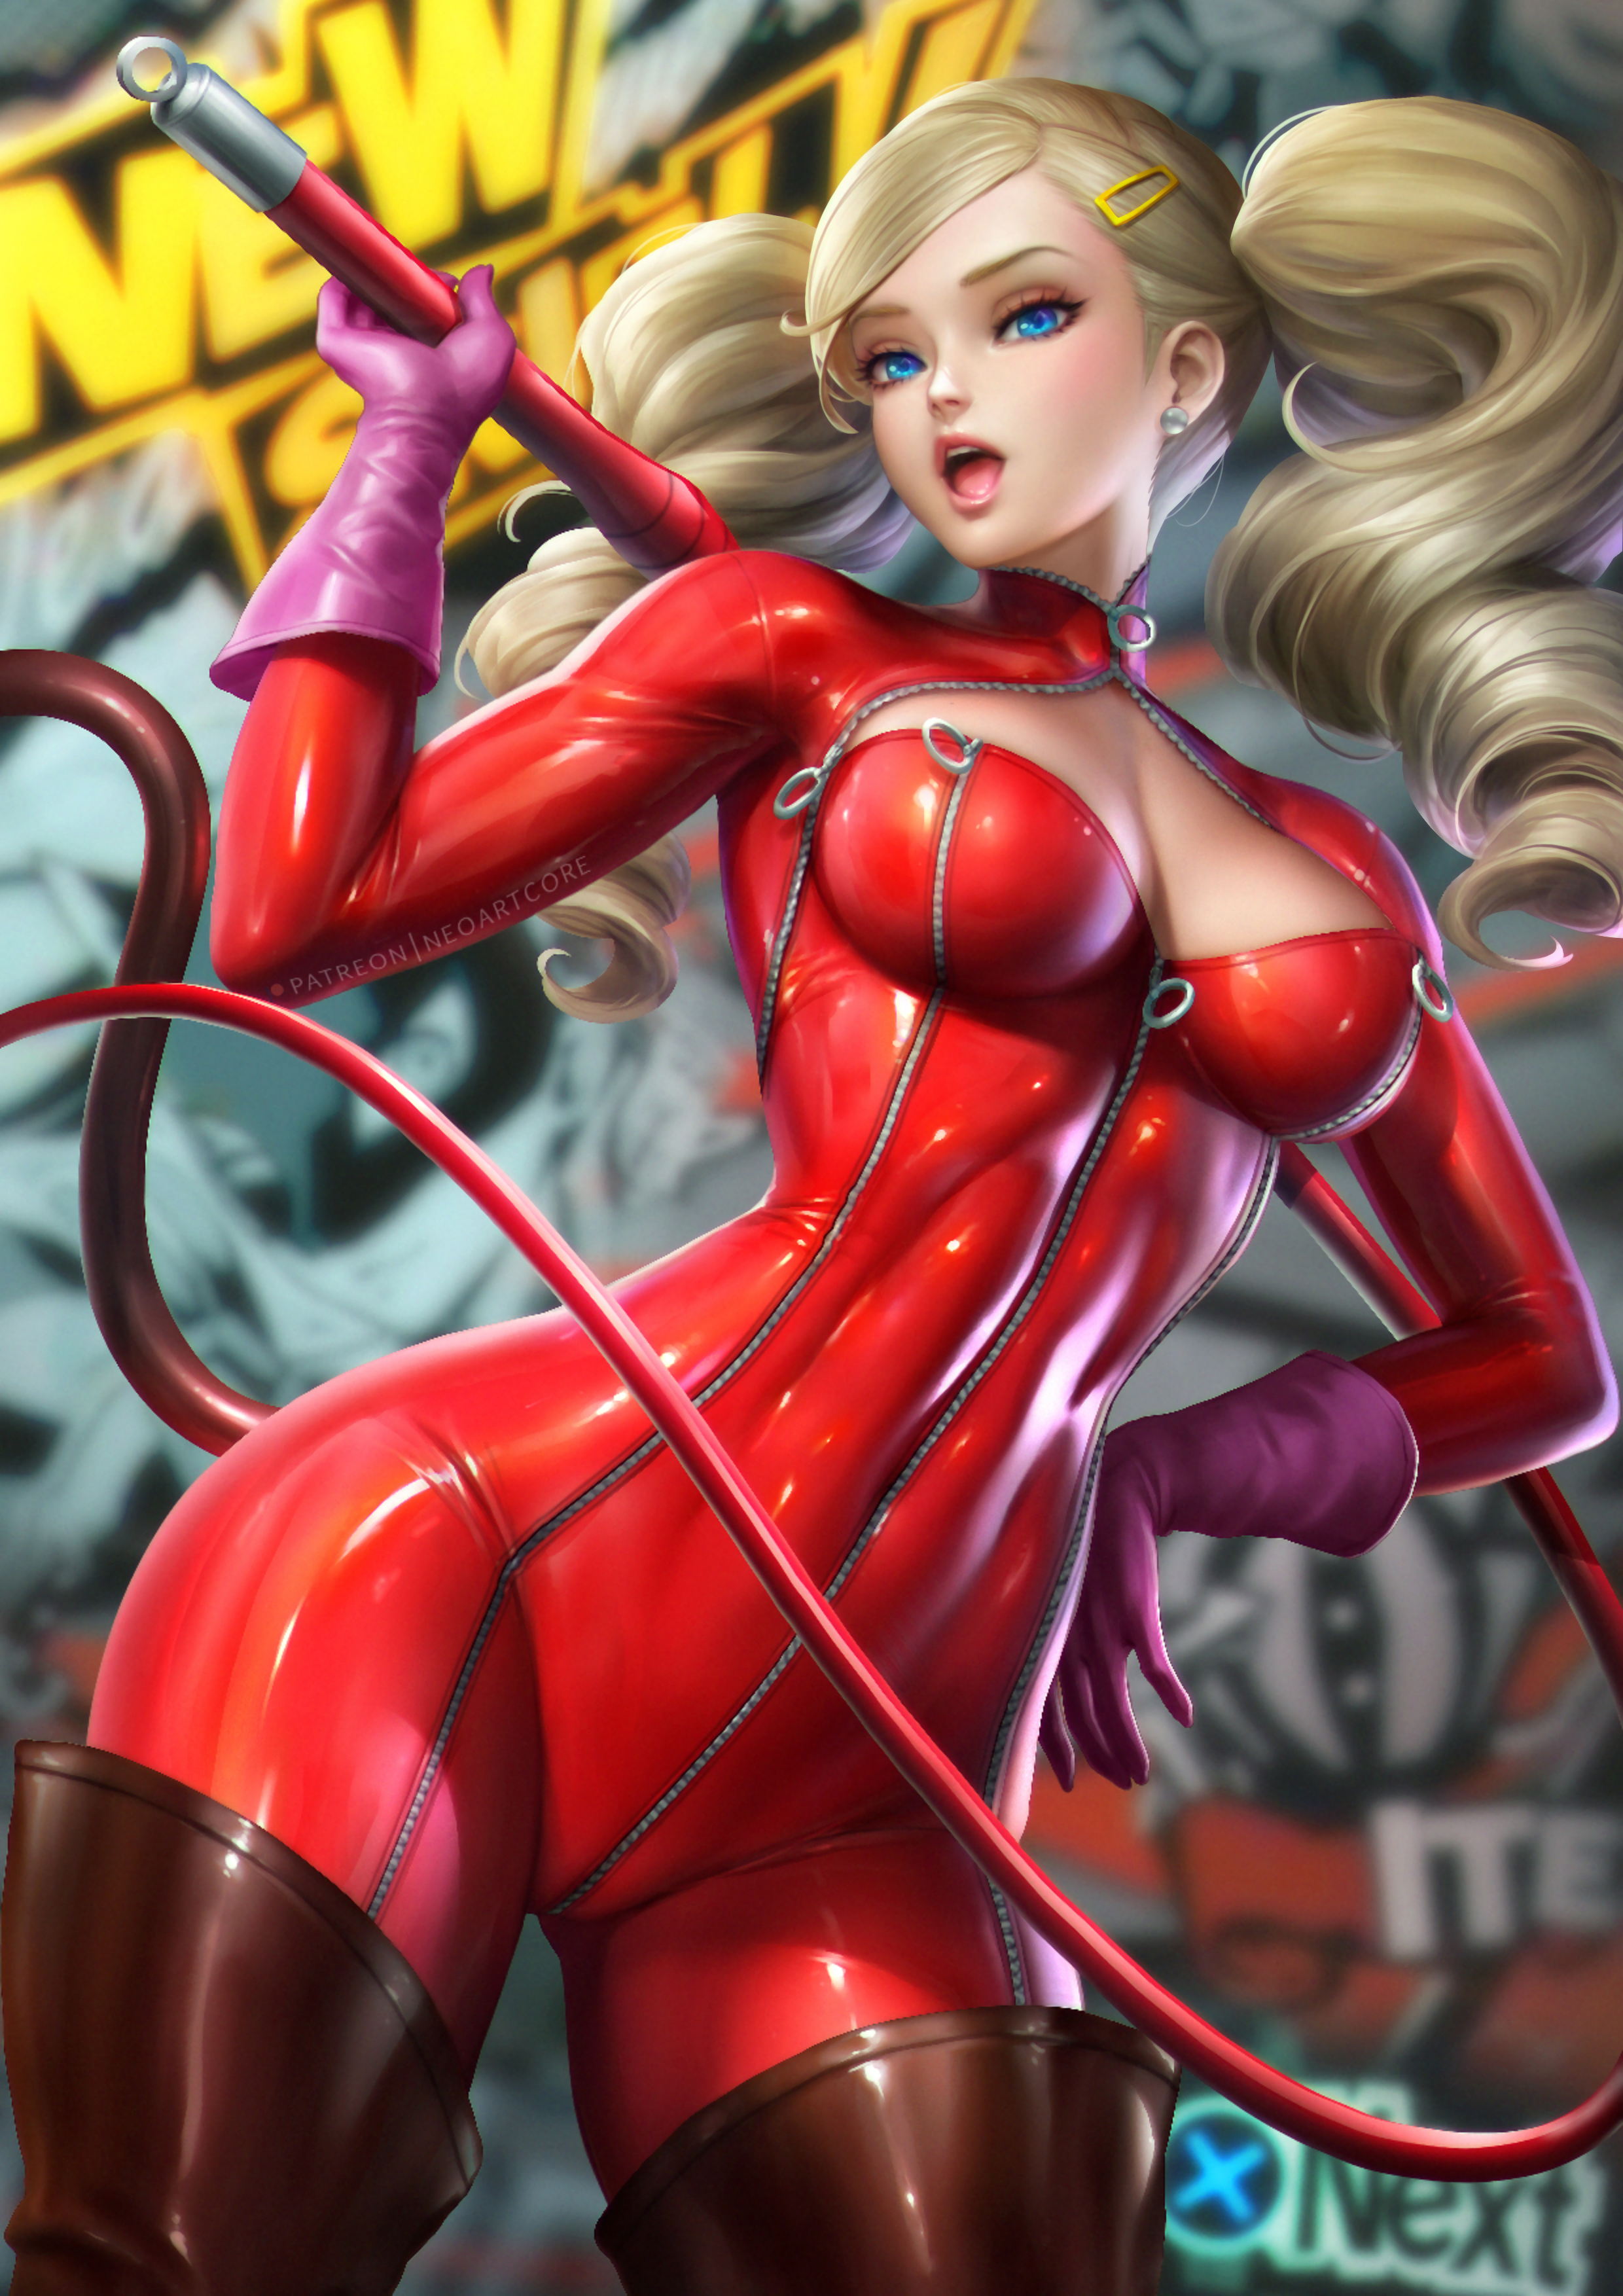 Anime 2480x3508 Ann Takamaki  Persona 5 NeoArtCorE (artist) tight clothing blonde blue eyes whips thigh high boots zipper looking at viewer standing slim body big boobs wide hips gloves portrait display anime girls Persona series